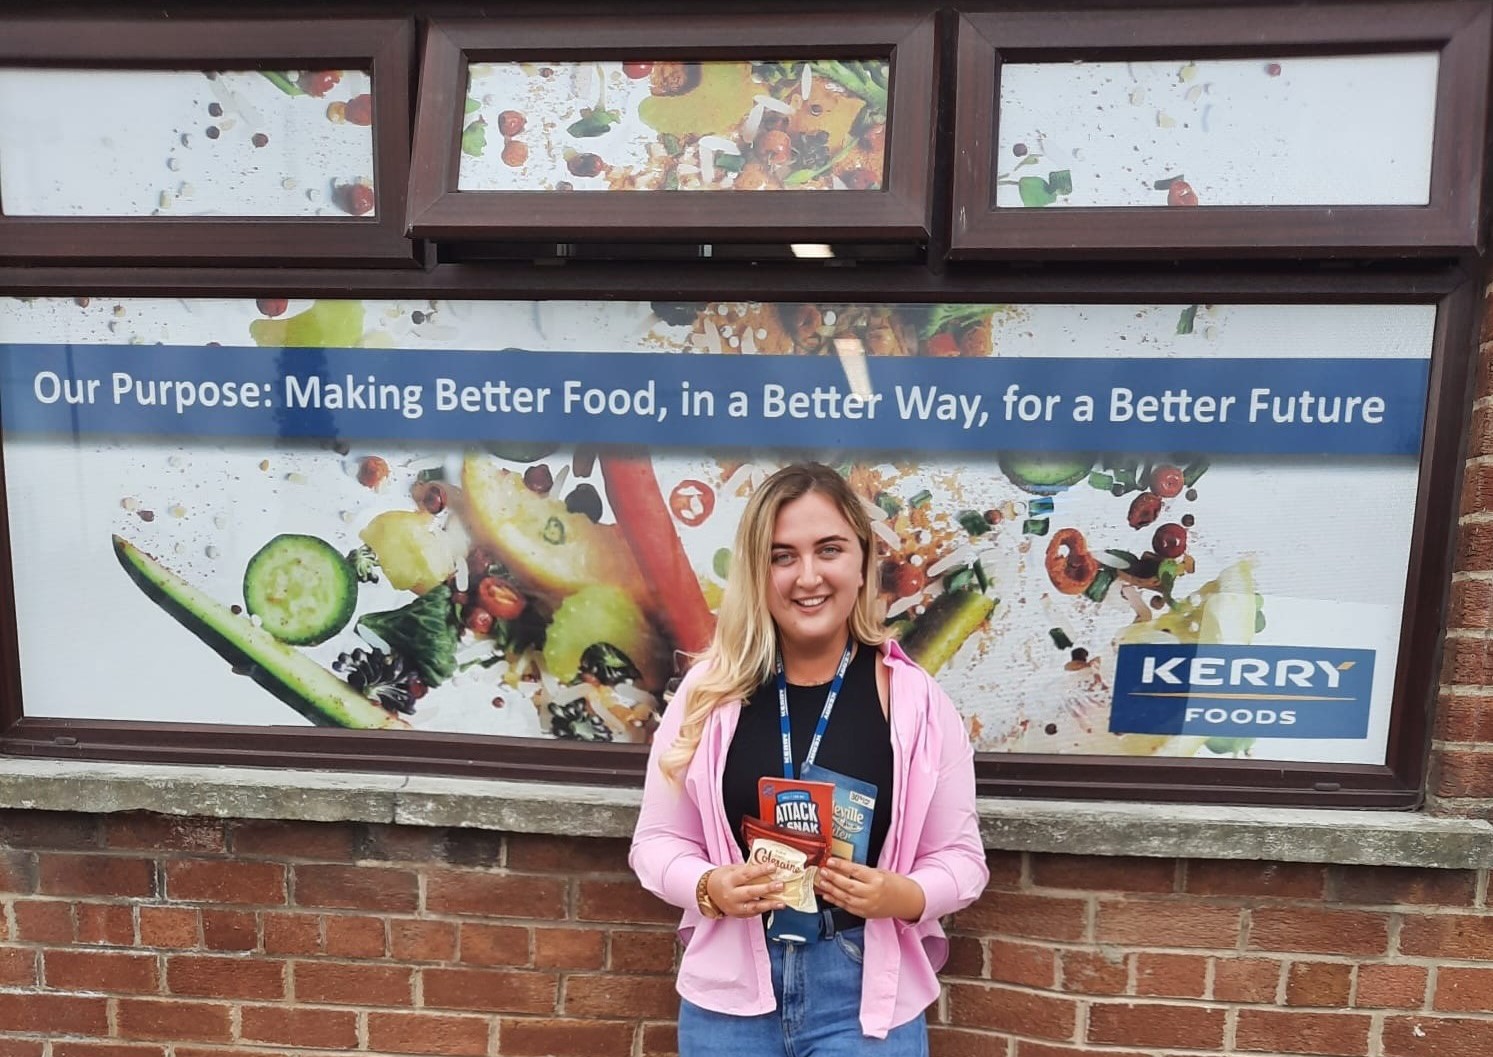 Hannah Jordan talks about her placement with Kerry Foods